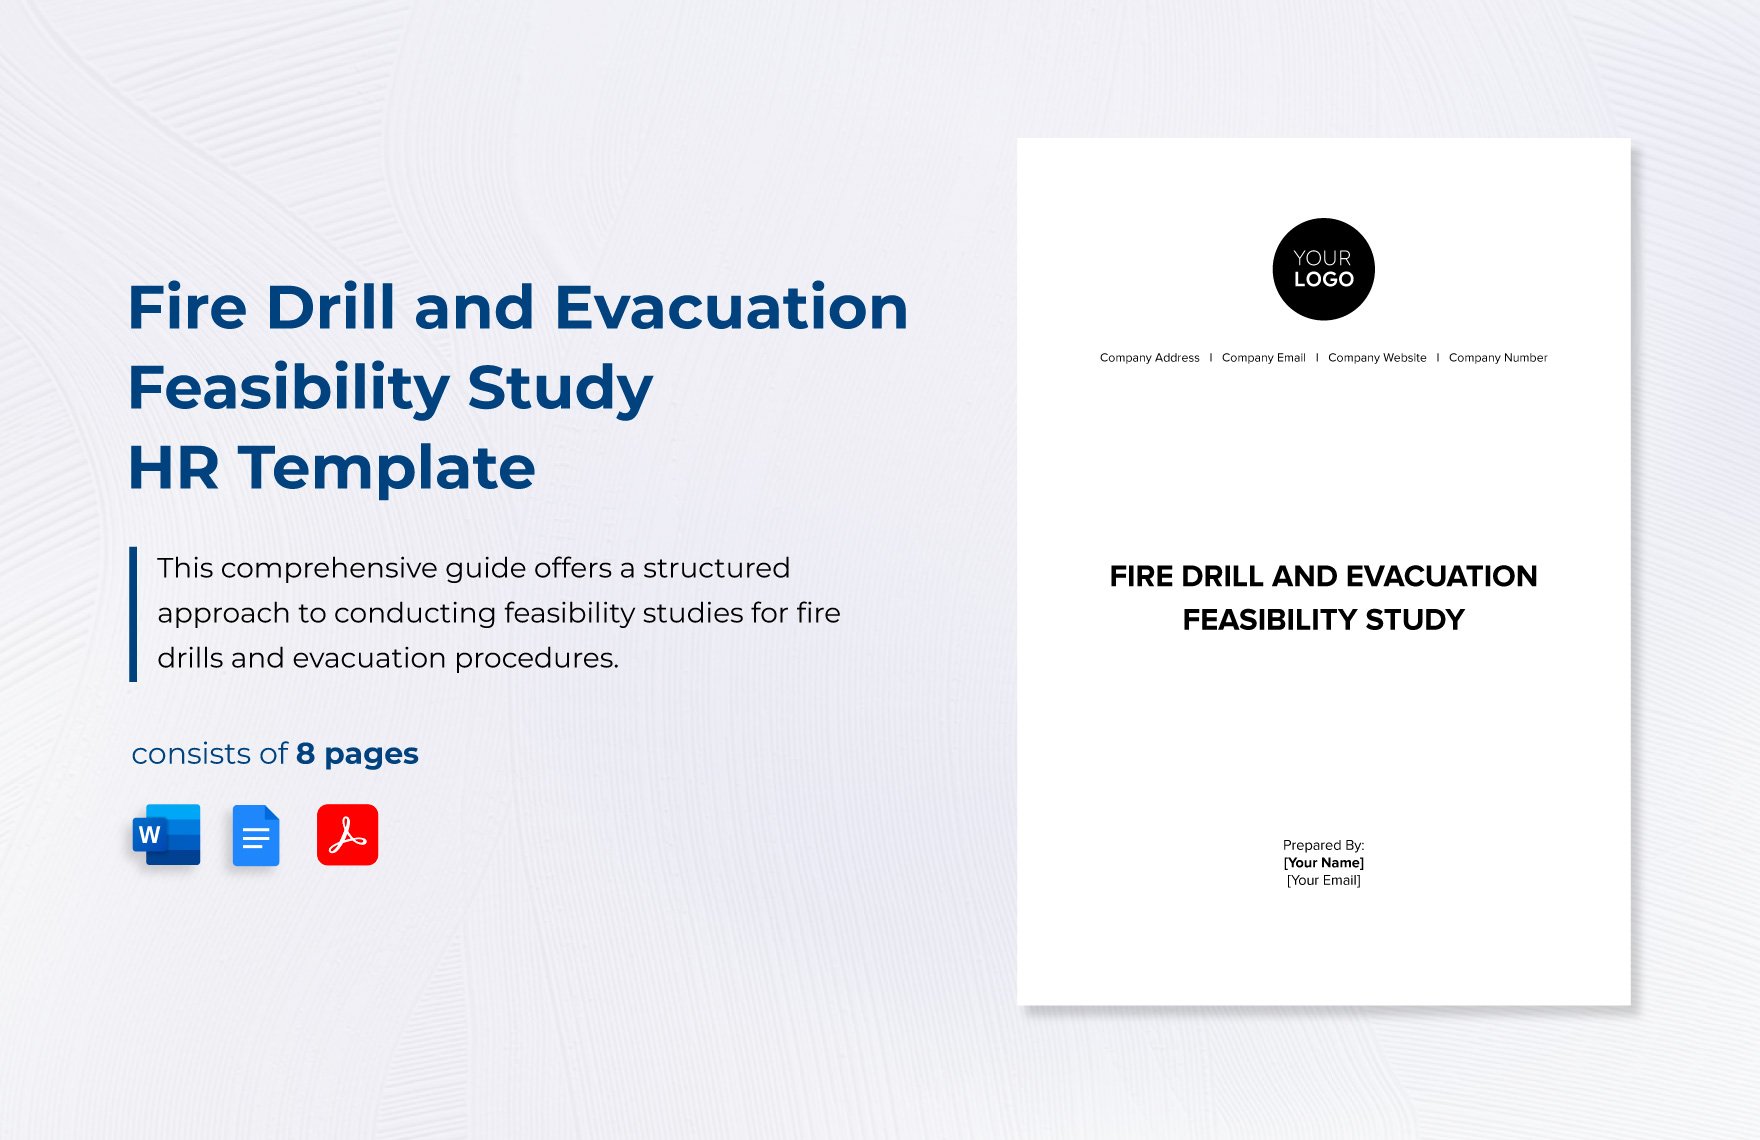 Fire Drill and Evacuation Feasibility Study HR Template